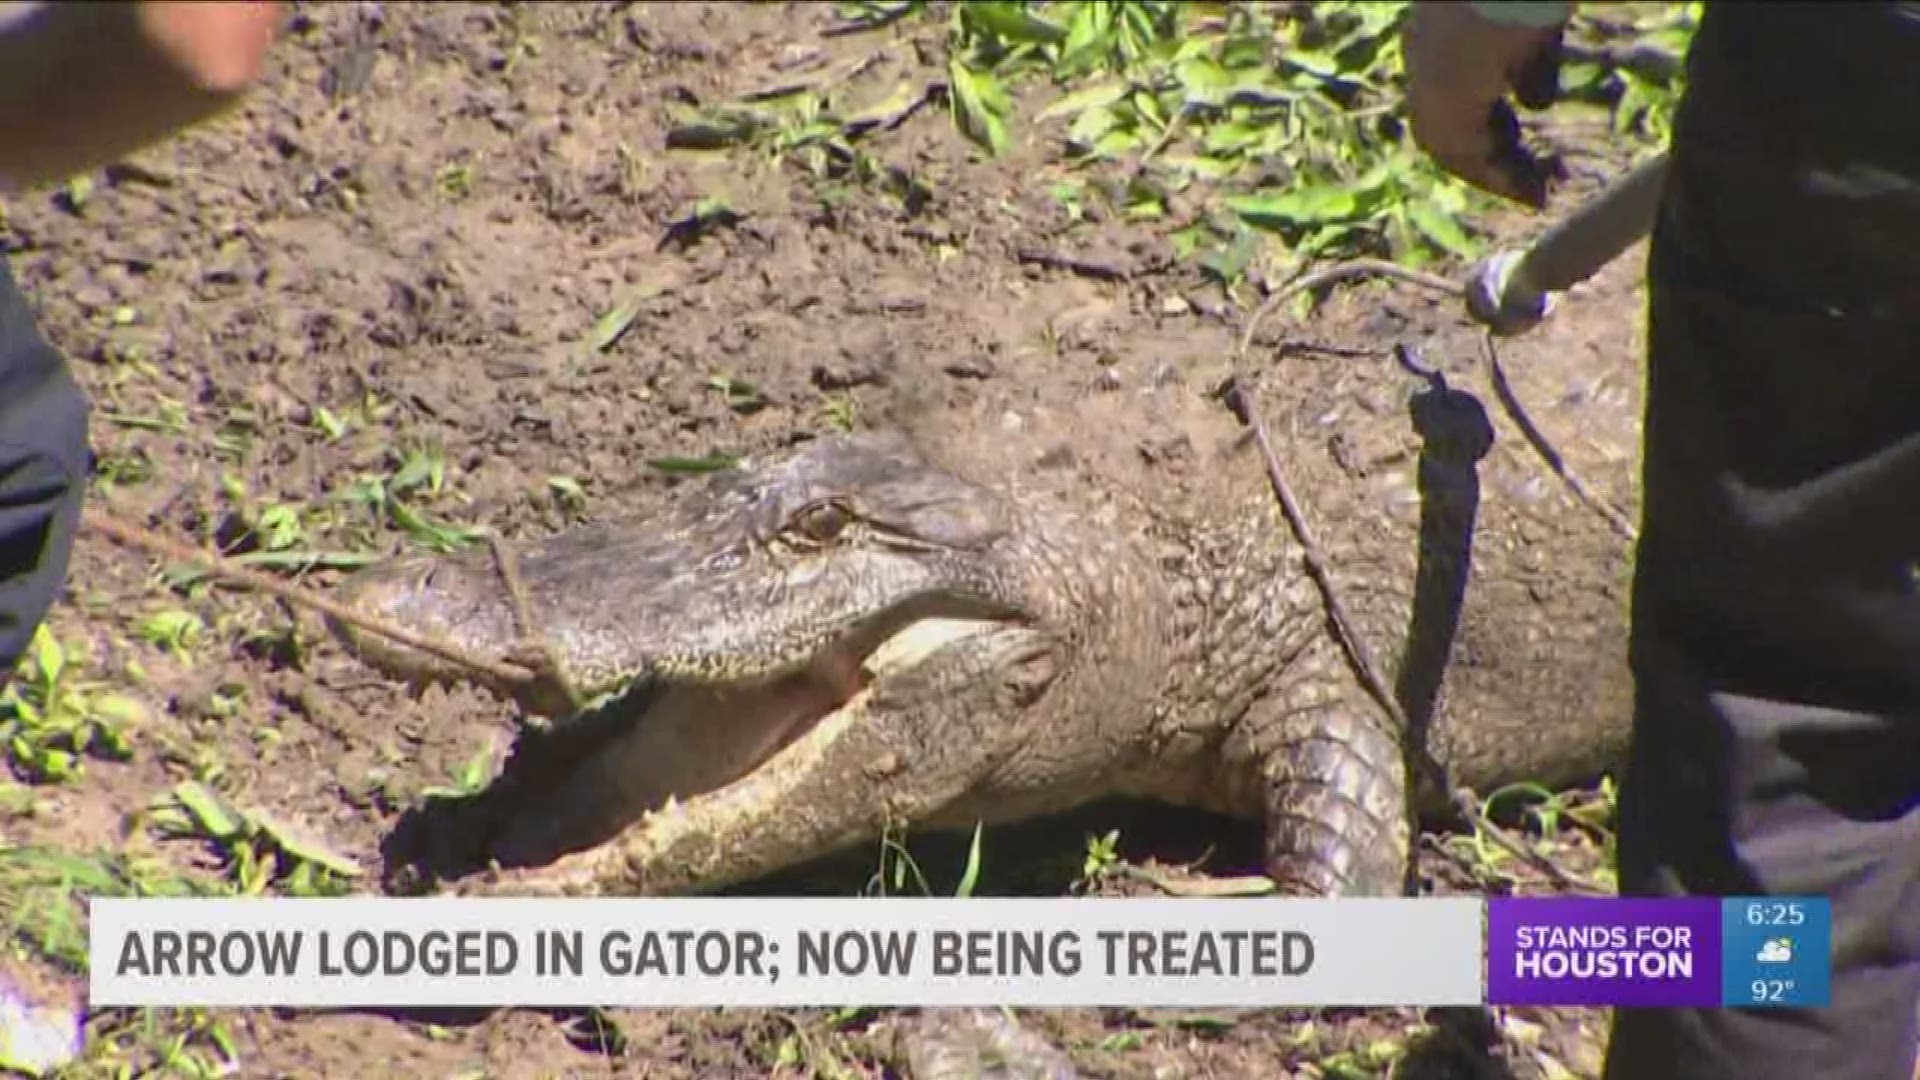 An arrow was found lodged in the gator, which is now being treated.